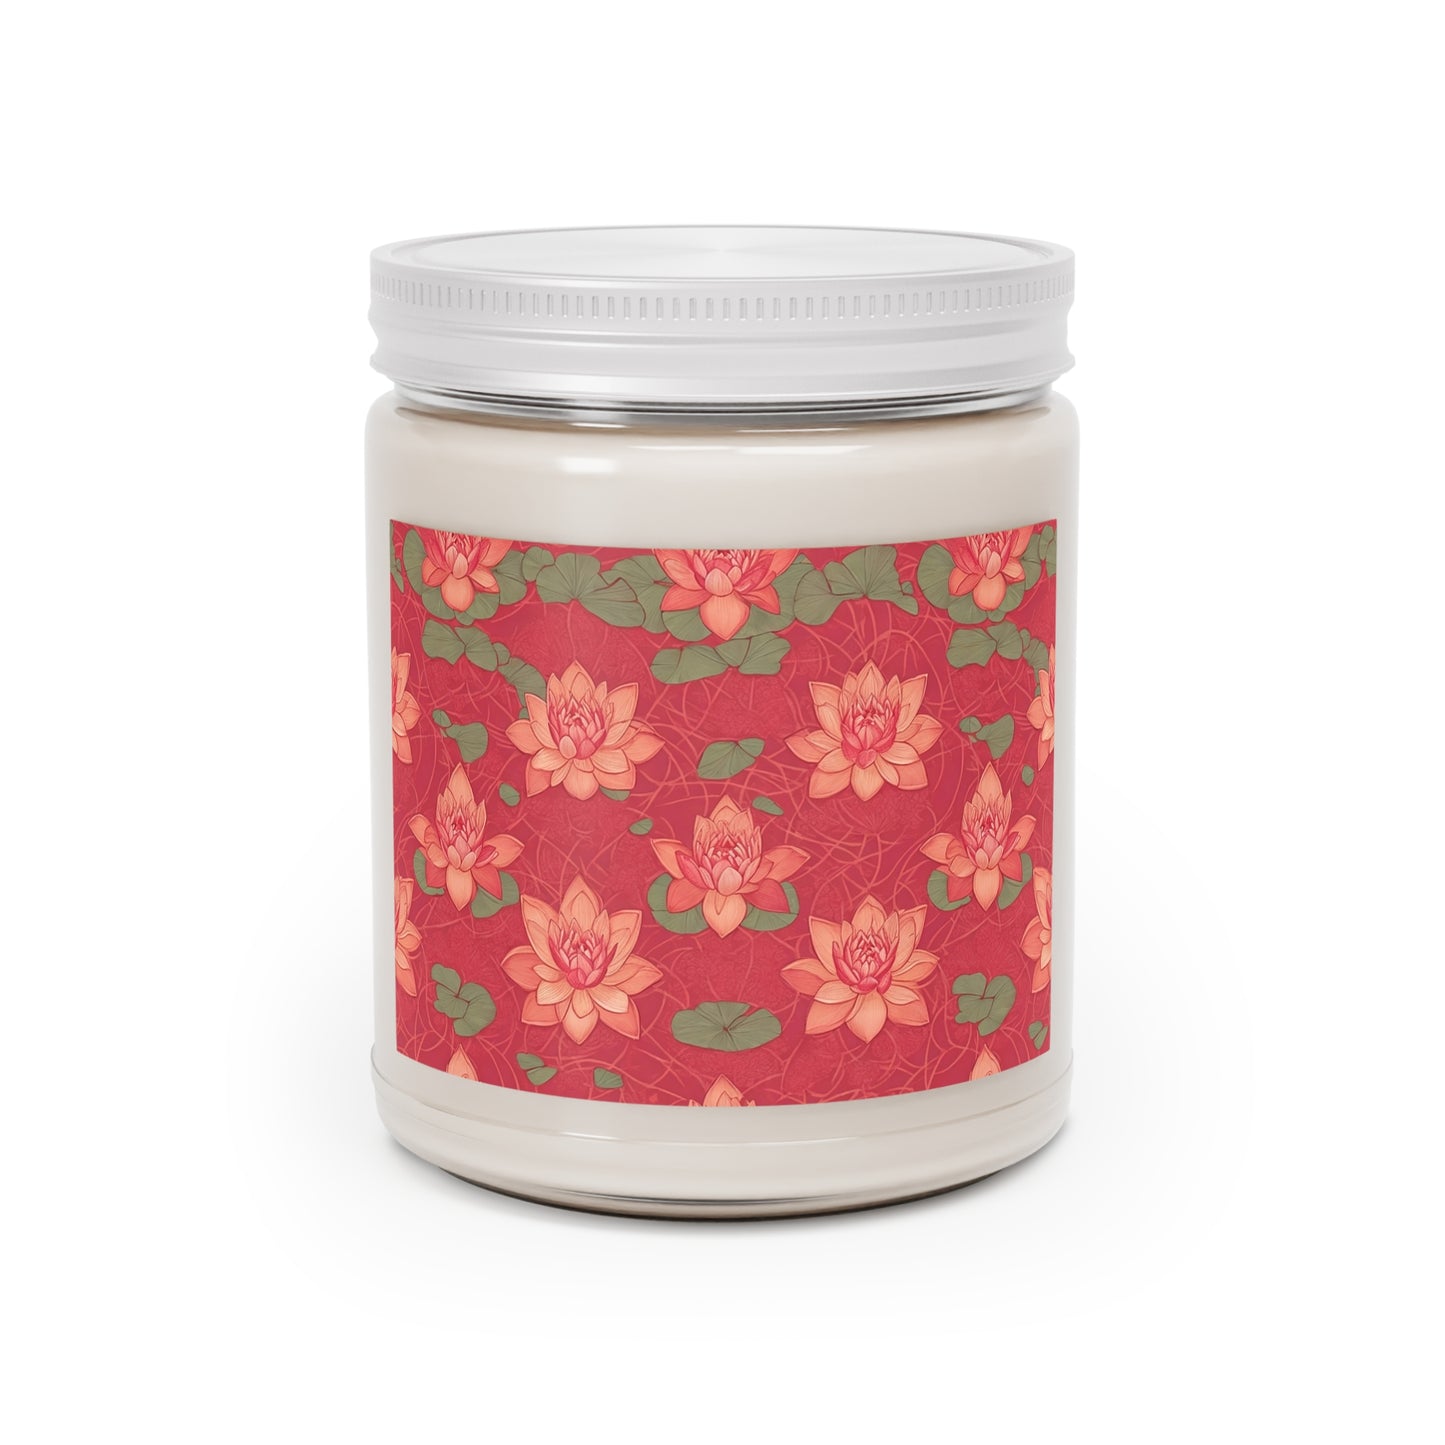 "Lotus Fire" Scented Candles, 9oz